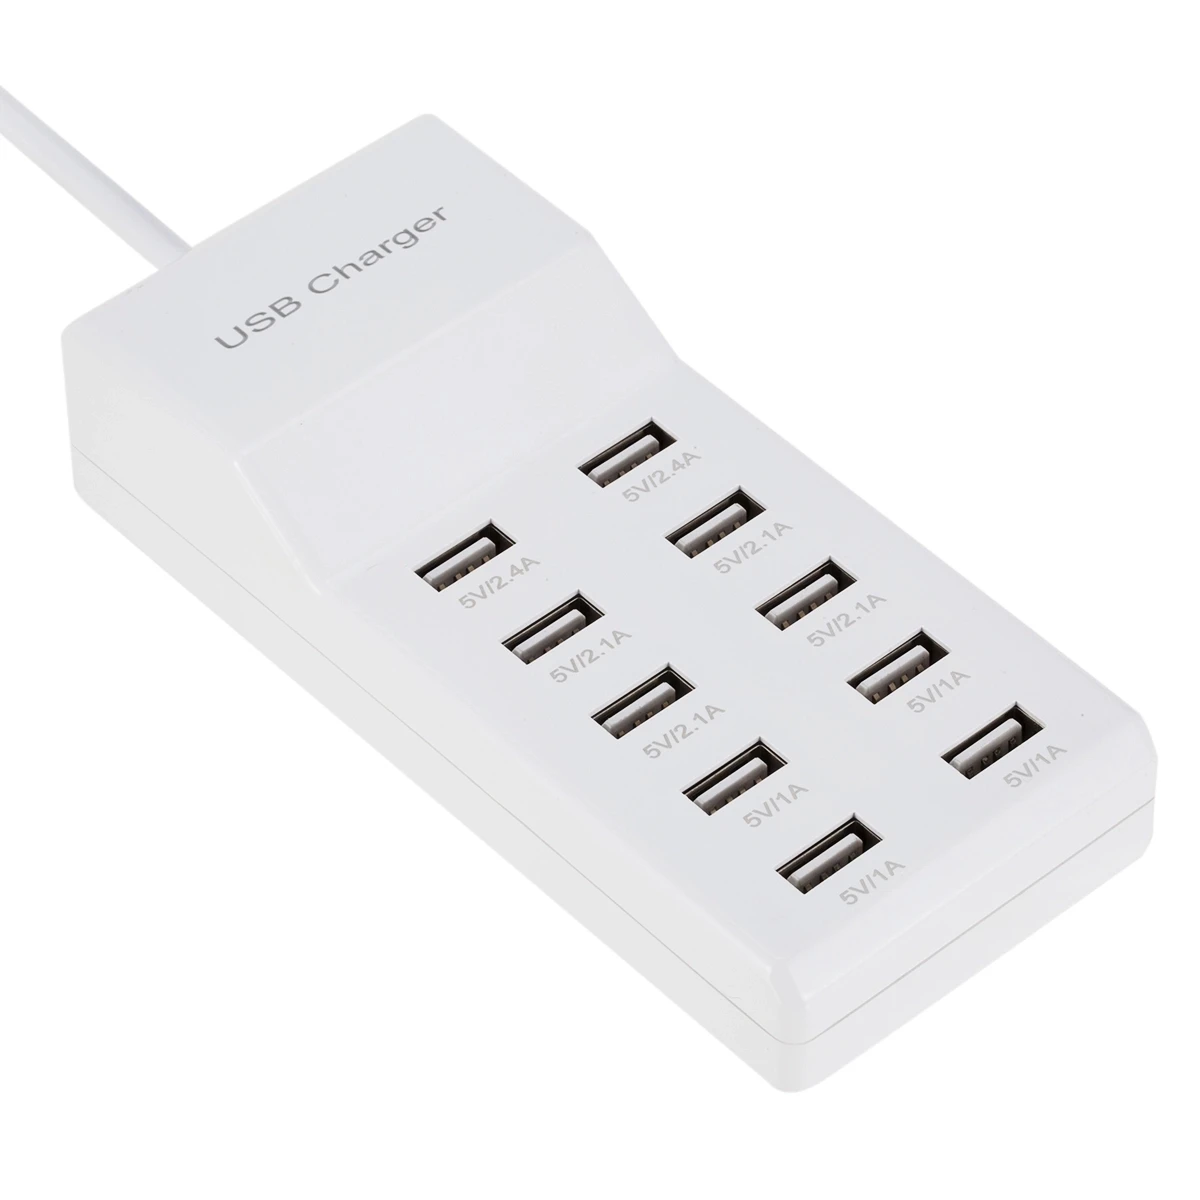 Mobile Phone Quick Charger Smart 10 Ports USB Charging Row Plug 5V 2A Multi-ports Travel Adapter Charger USB Charger